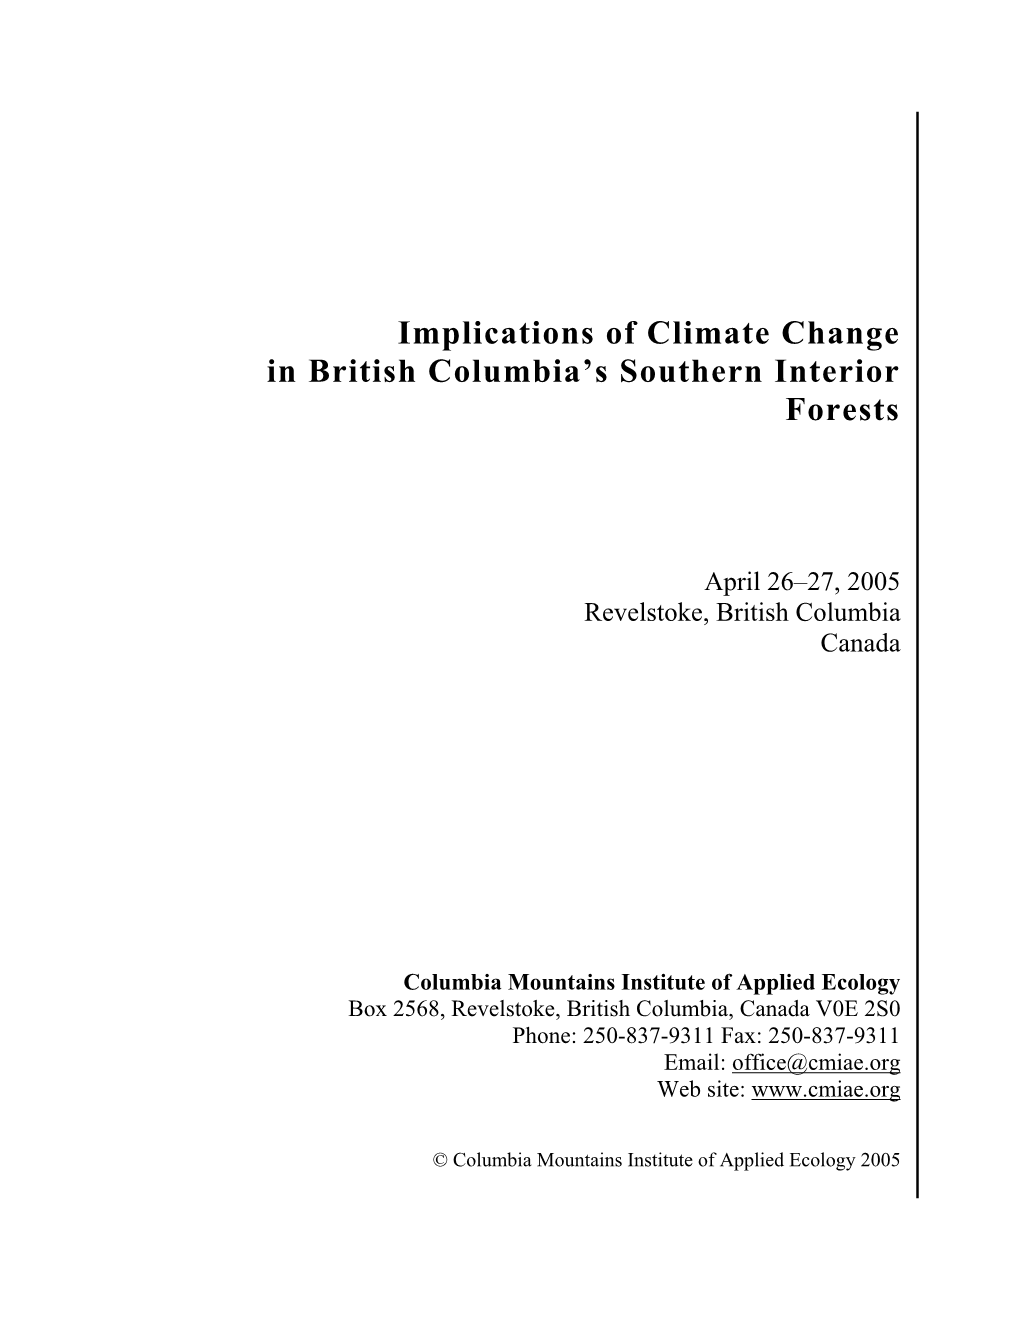 Implications of Climate Change in British Columbia's Southern Interior